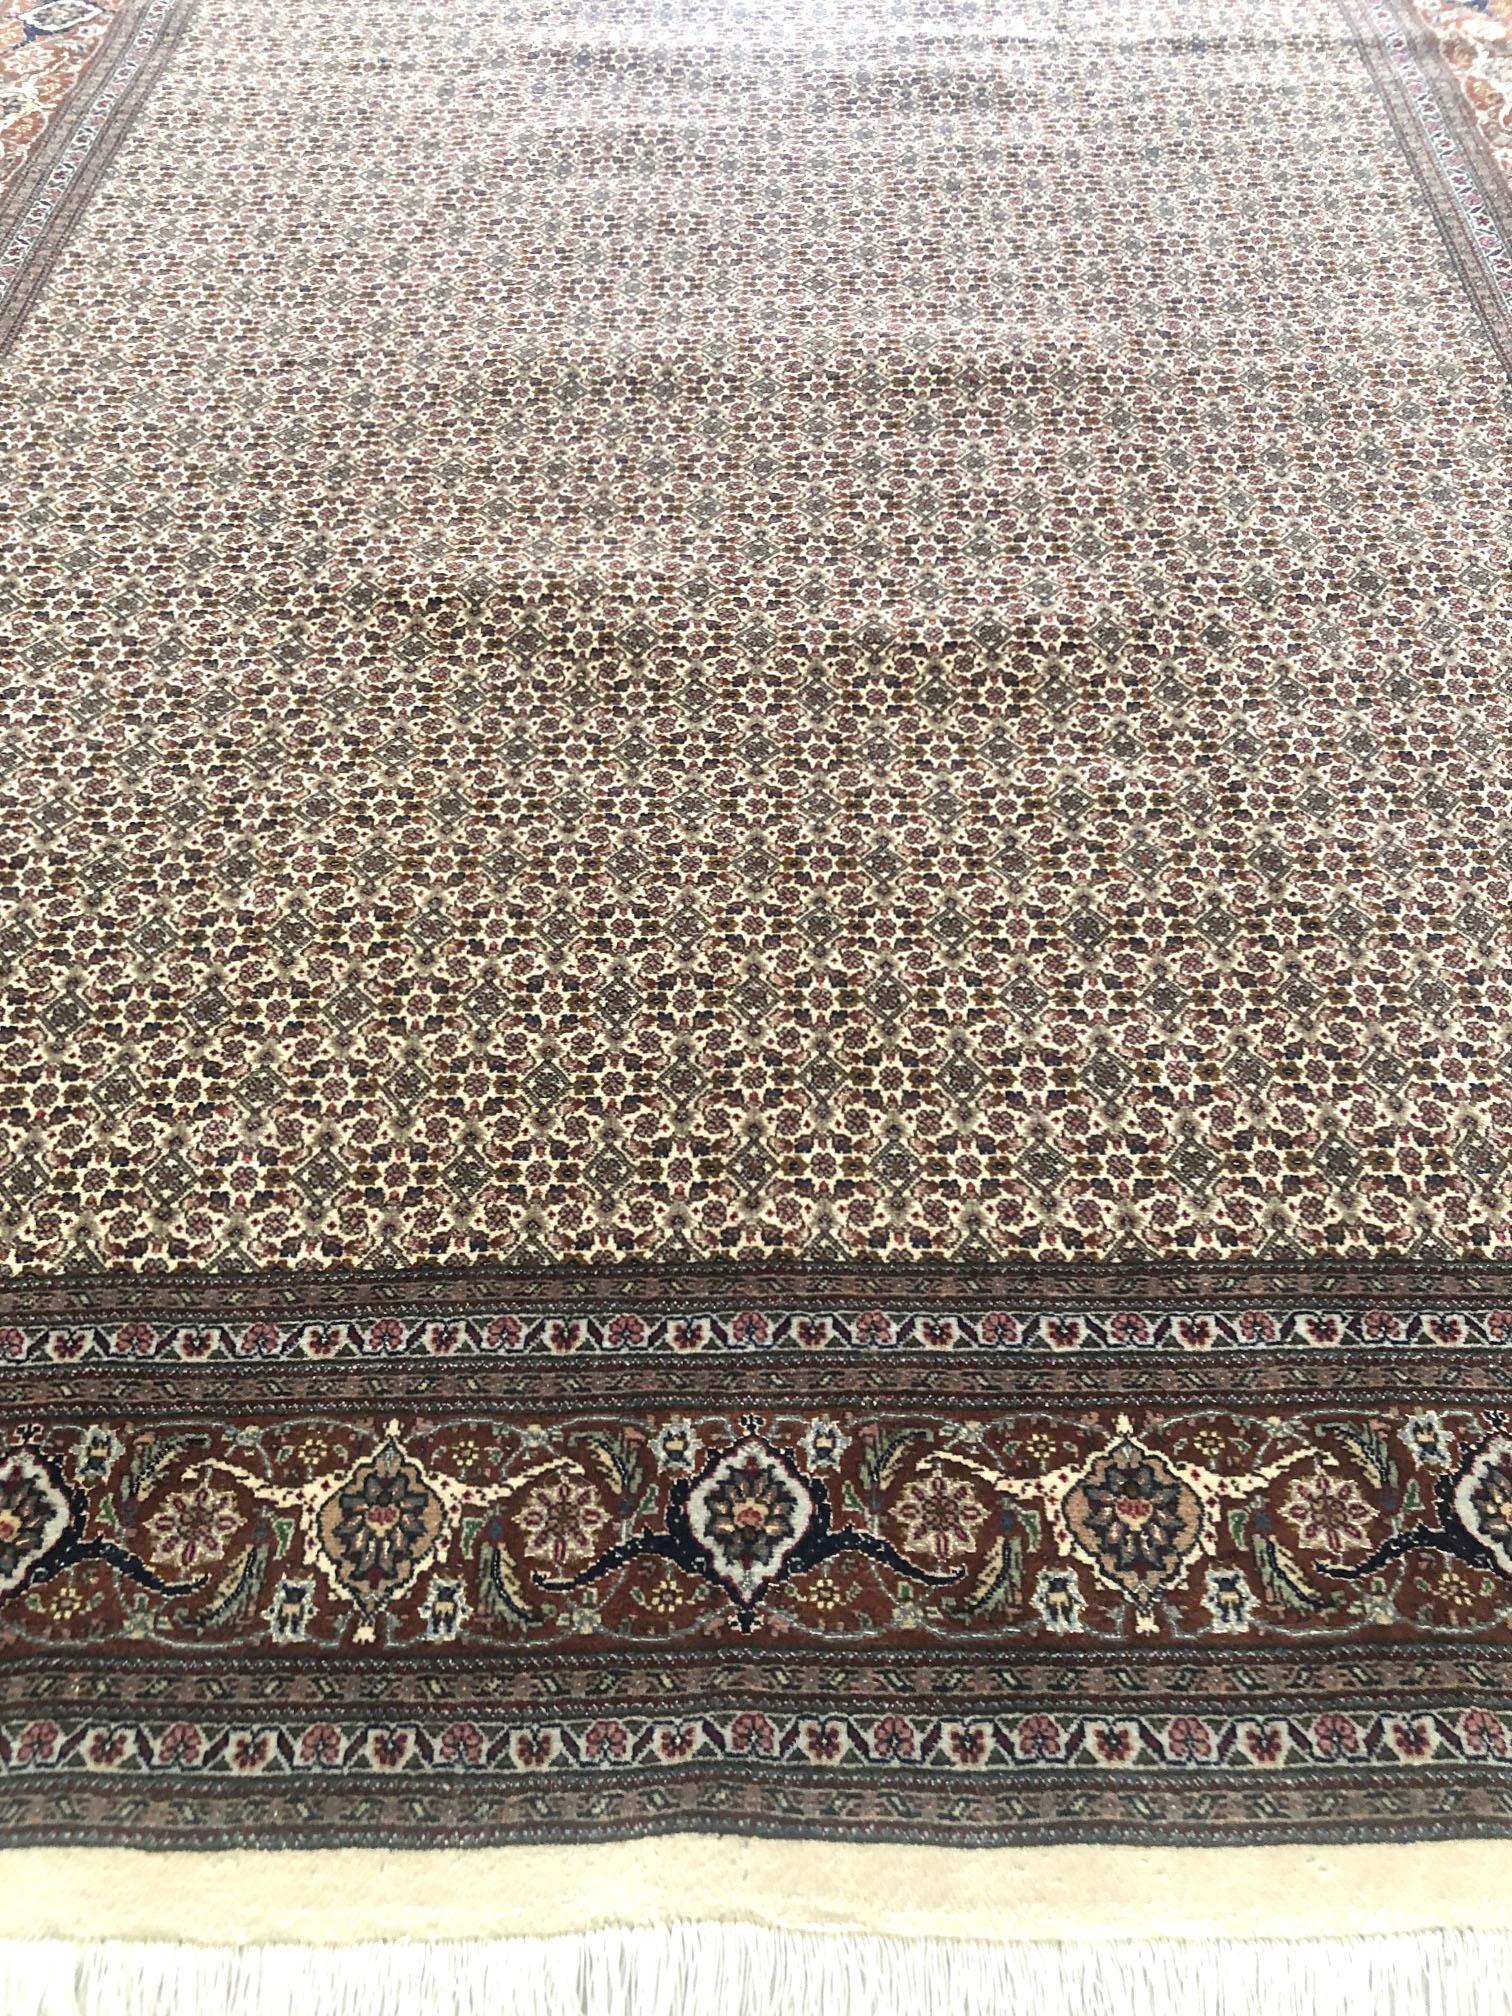 Authentic Persian Hand Knotted All-Over Fish Design 'Mahi' Tabriz Rug In New Condition For Sale In San Diego, CA